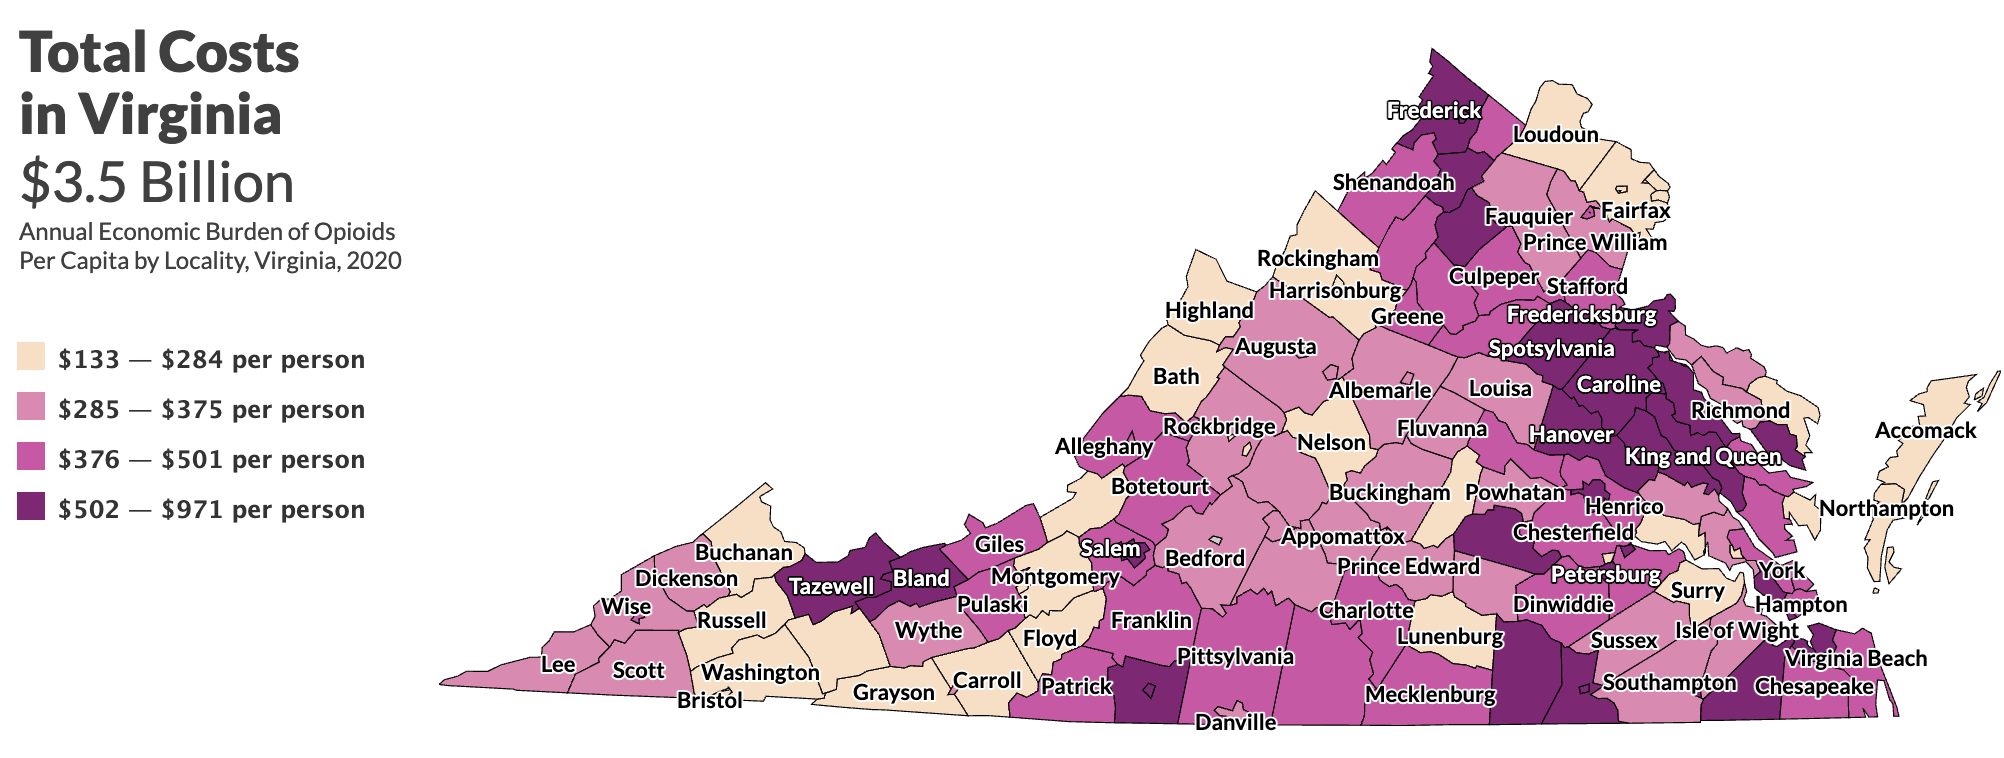 A map of Virginia comparing the costs of addiction in each county.